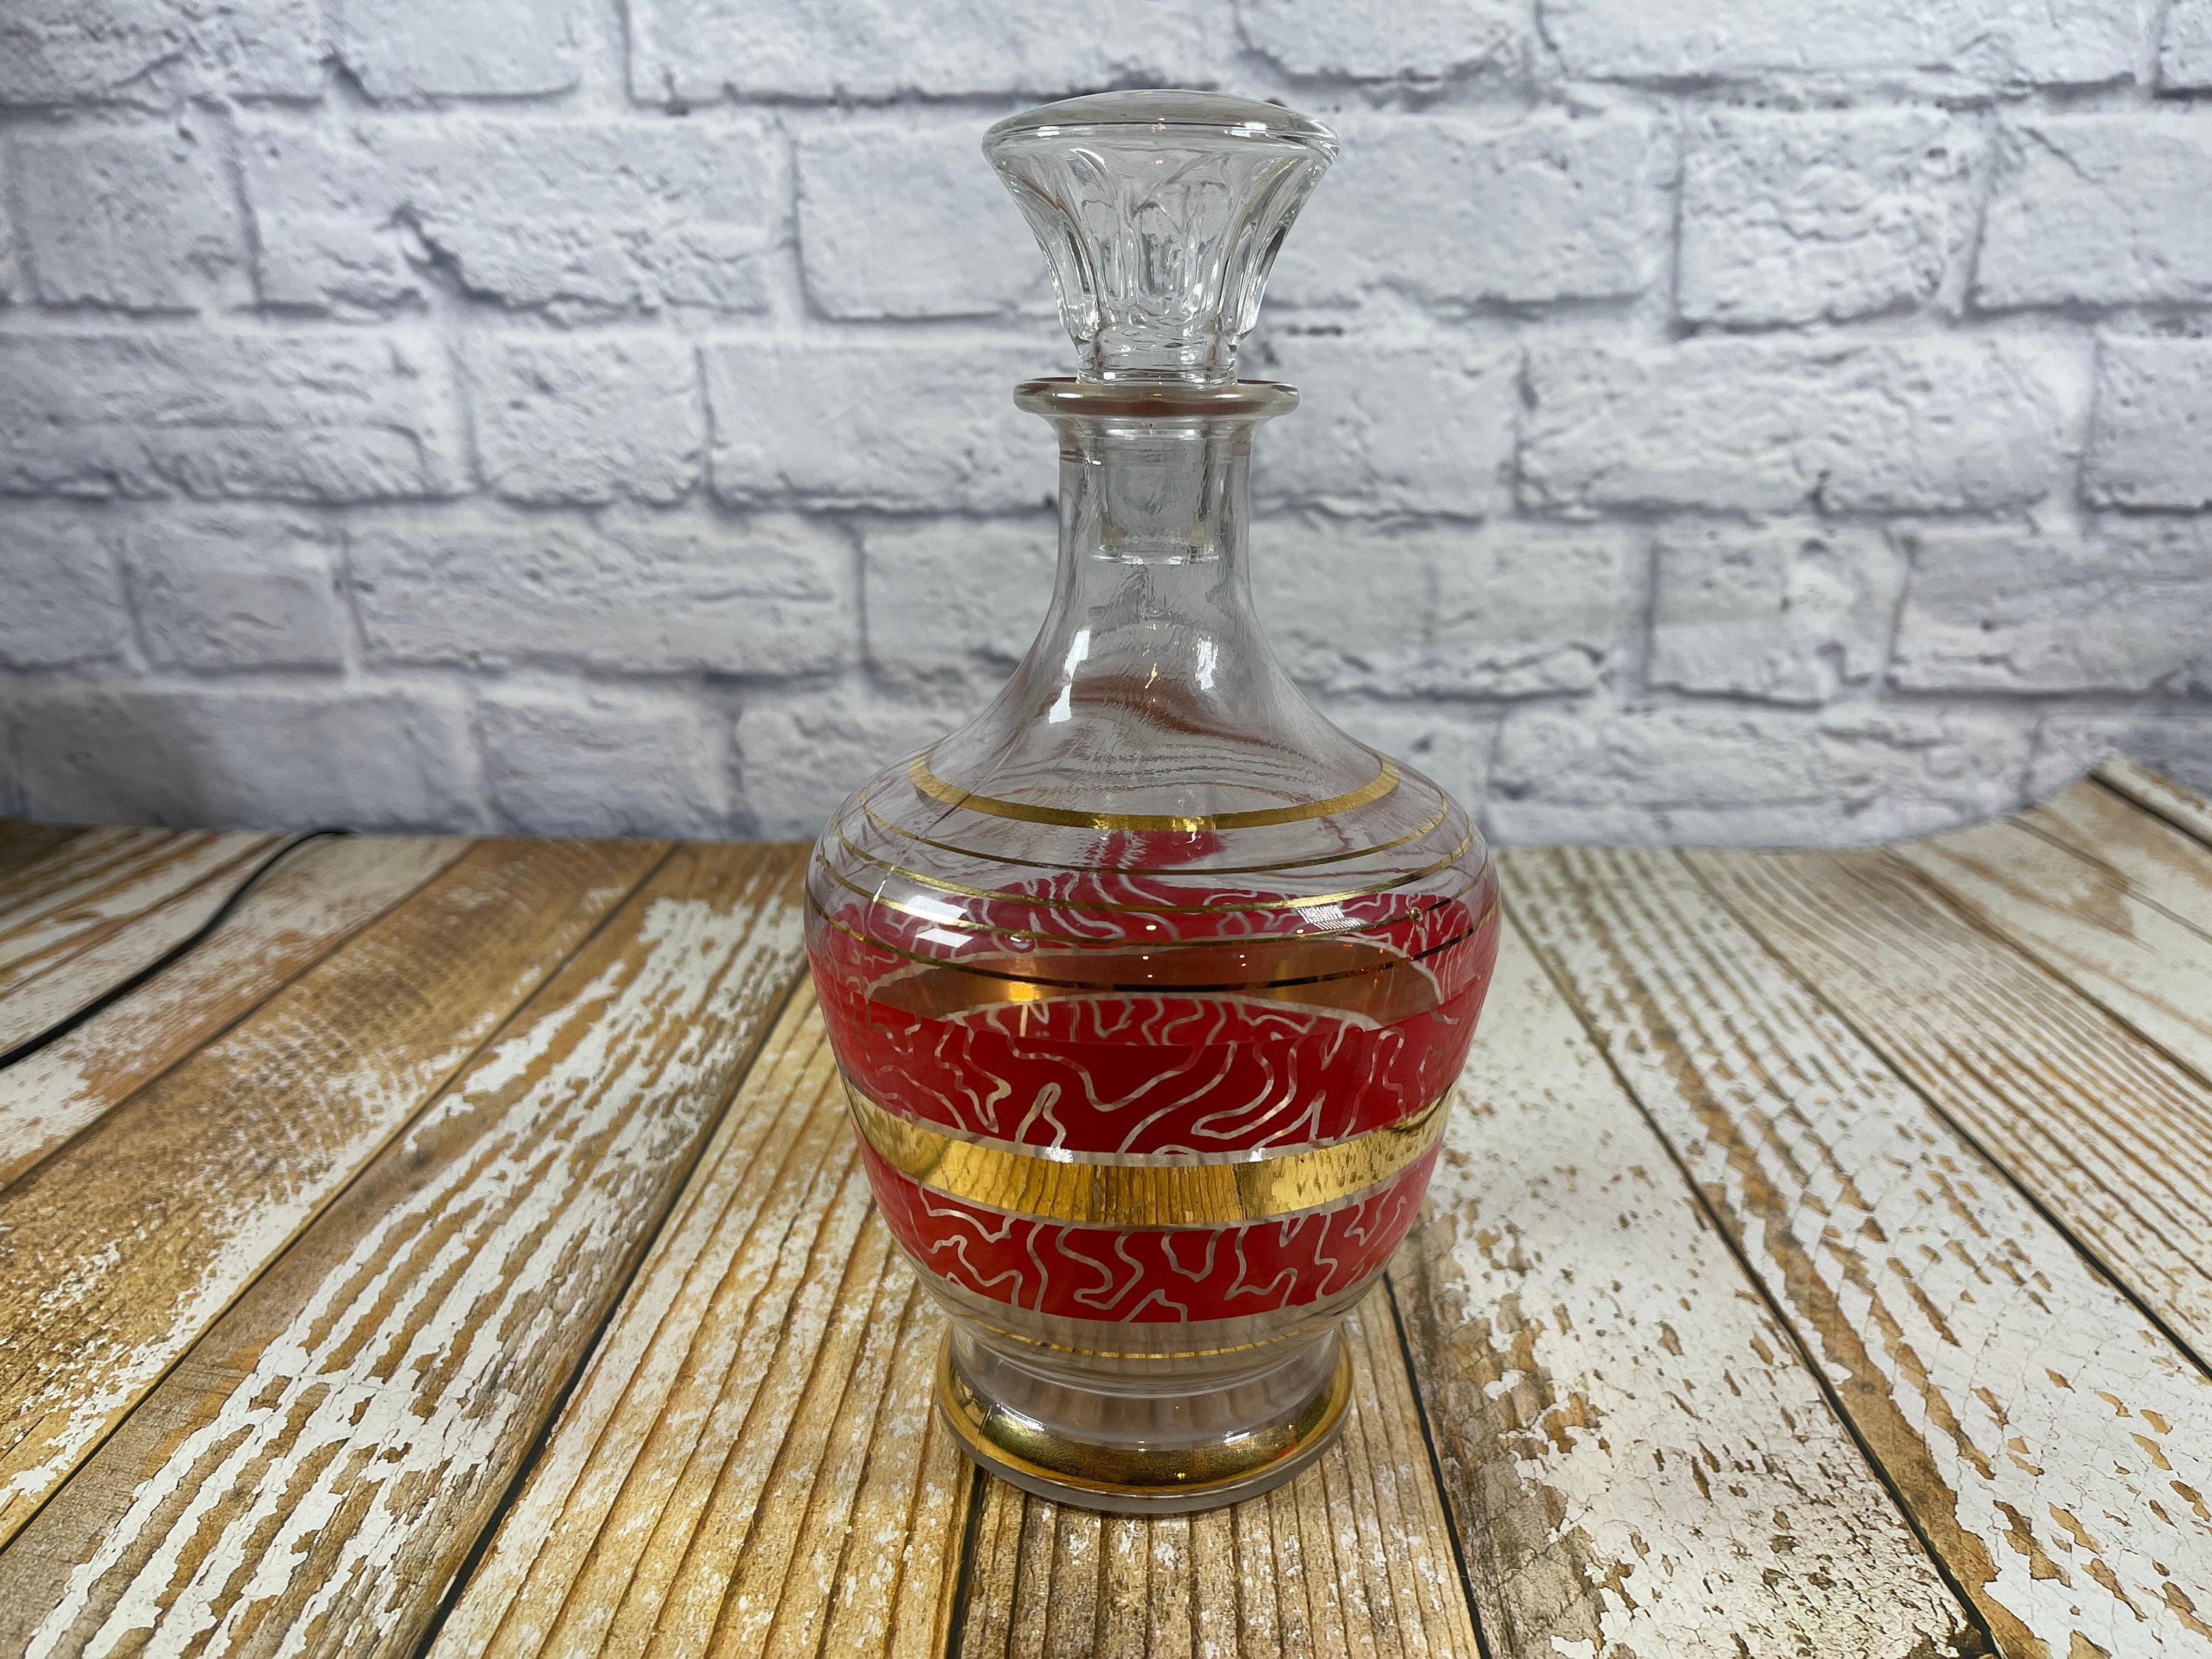 Glass Diamond Shaped Decanter with Gold Reflection and Lid – Classic Touch  Decor